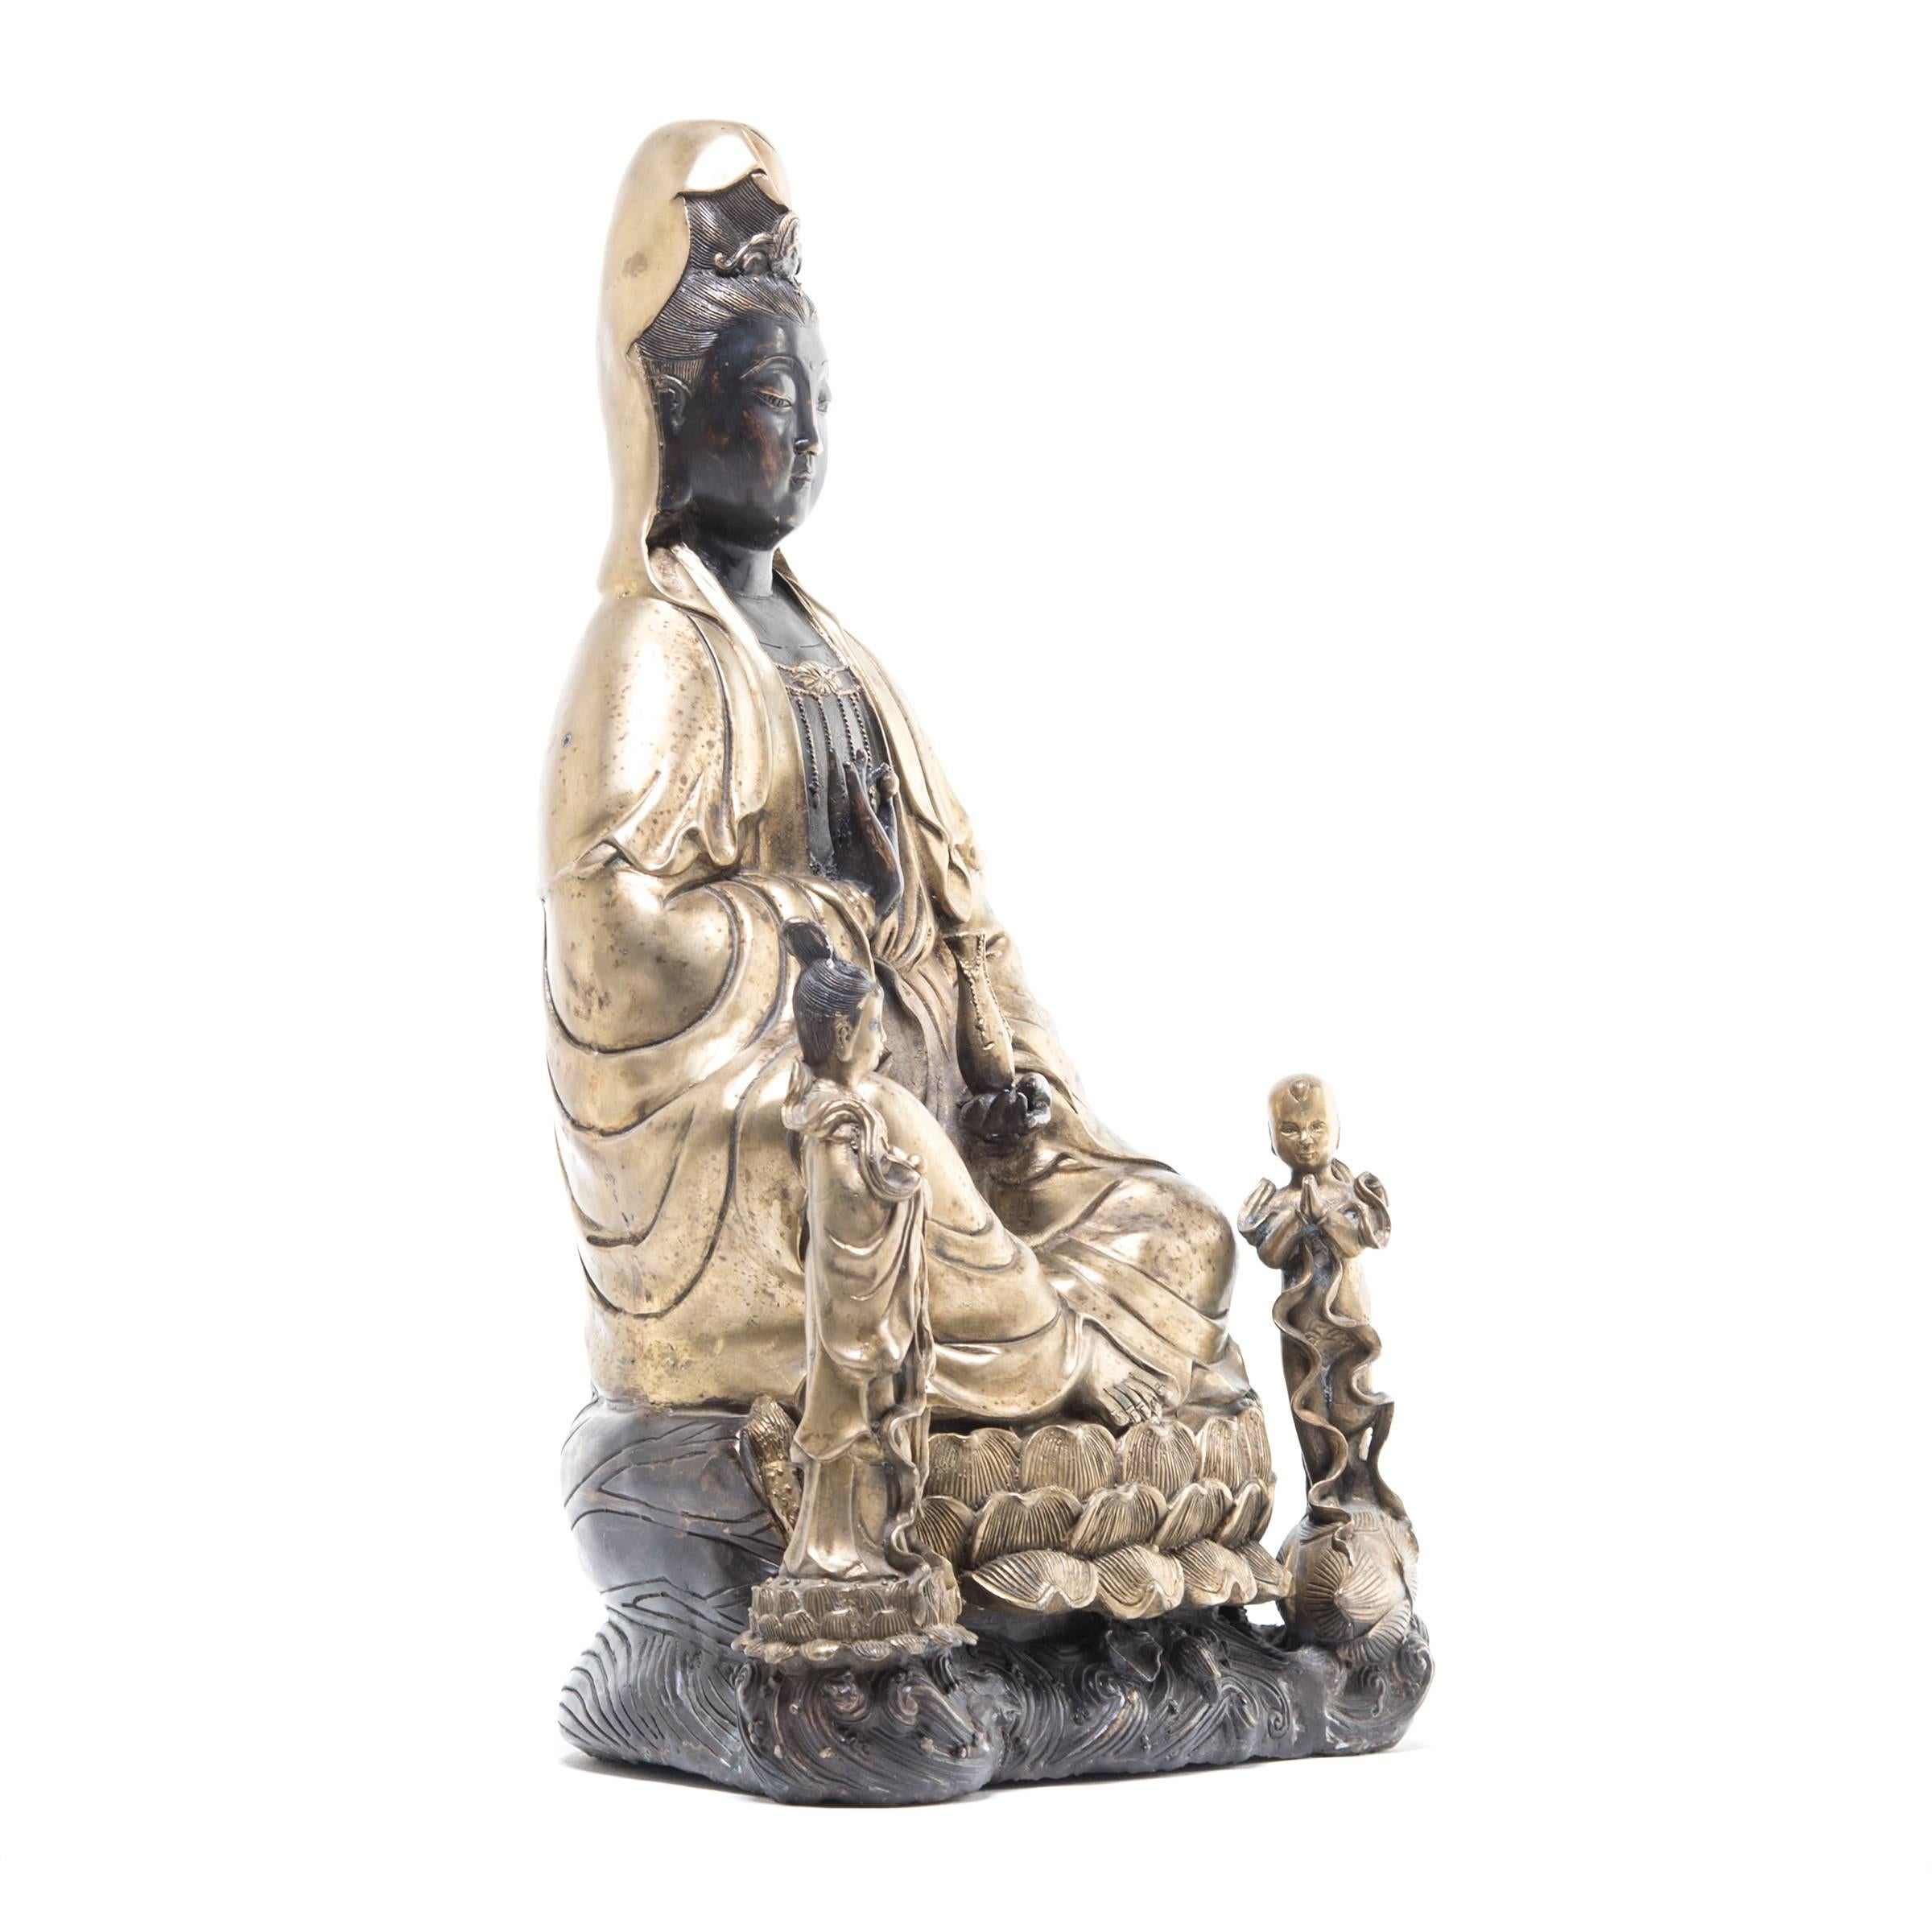 This majestic statue is a portrayal of Guan Yin, an enlightened bodhisattva of infinite compassion well known among East Asian Buddhists. She wears a serene expression and is seated on an exquisitely detailed lotus blossom throne with her attendants